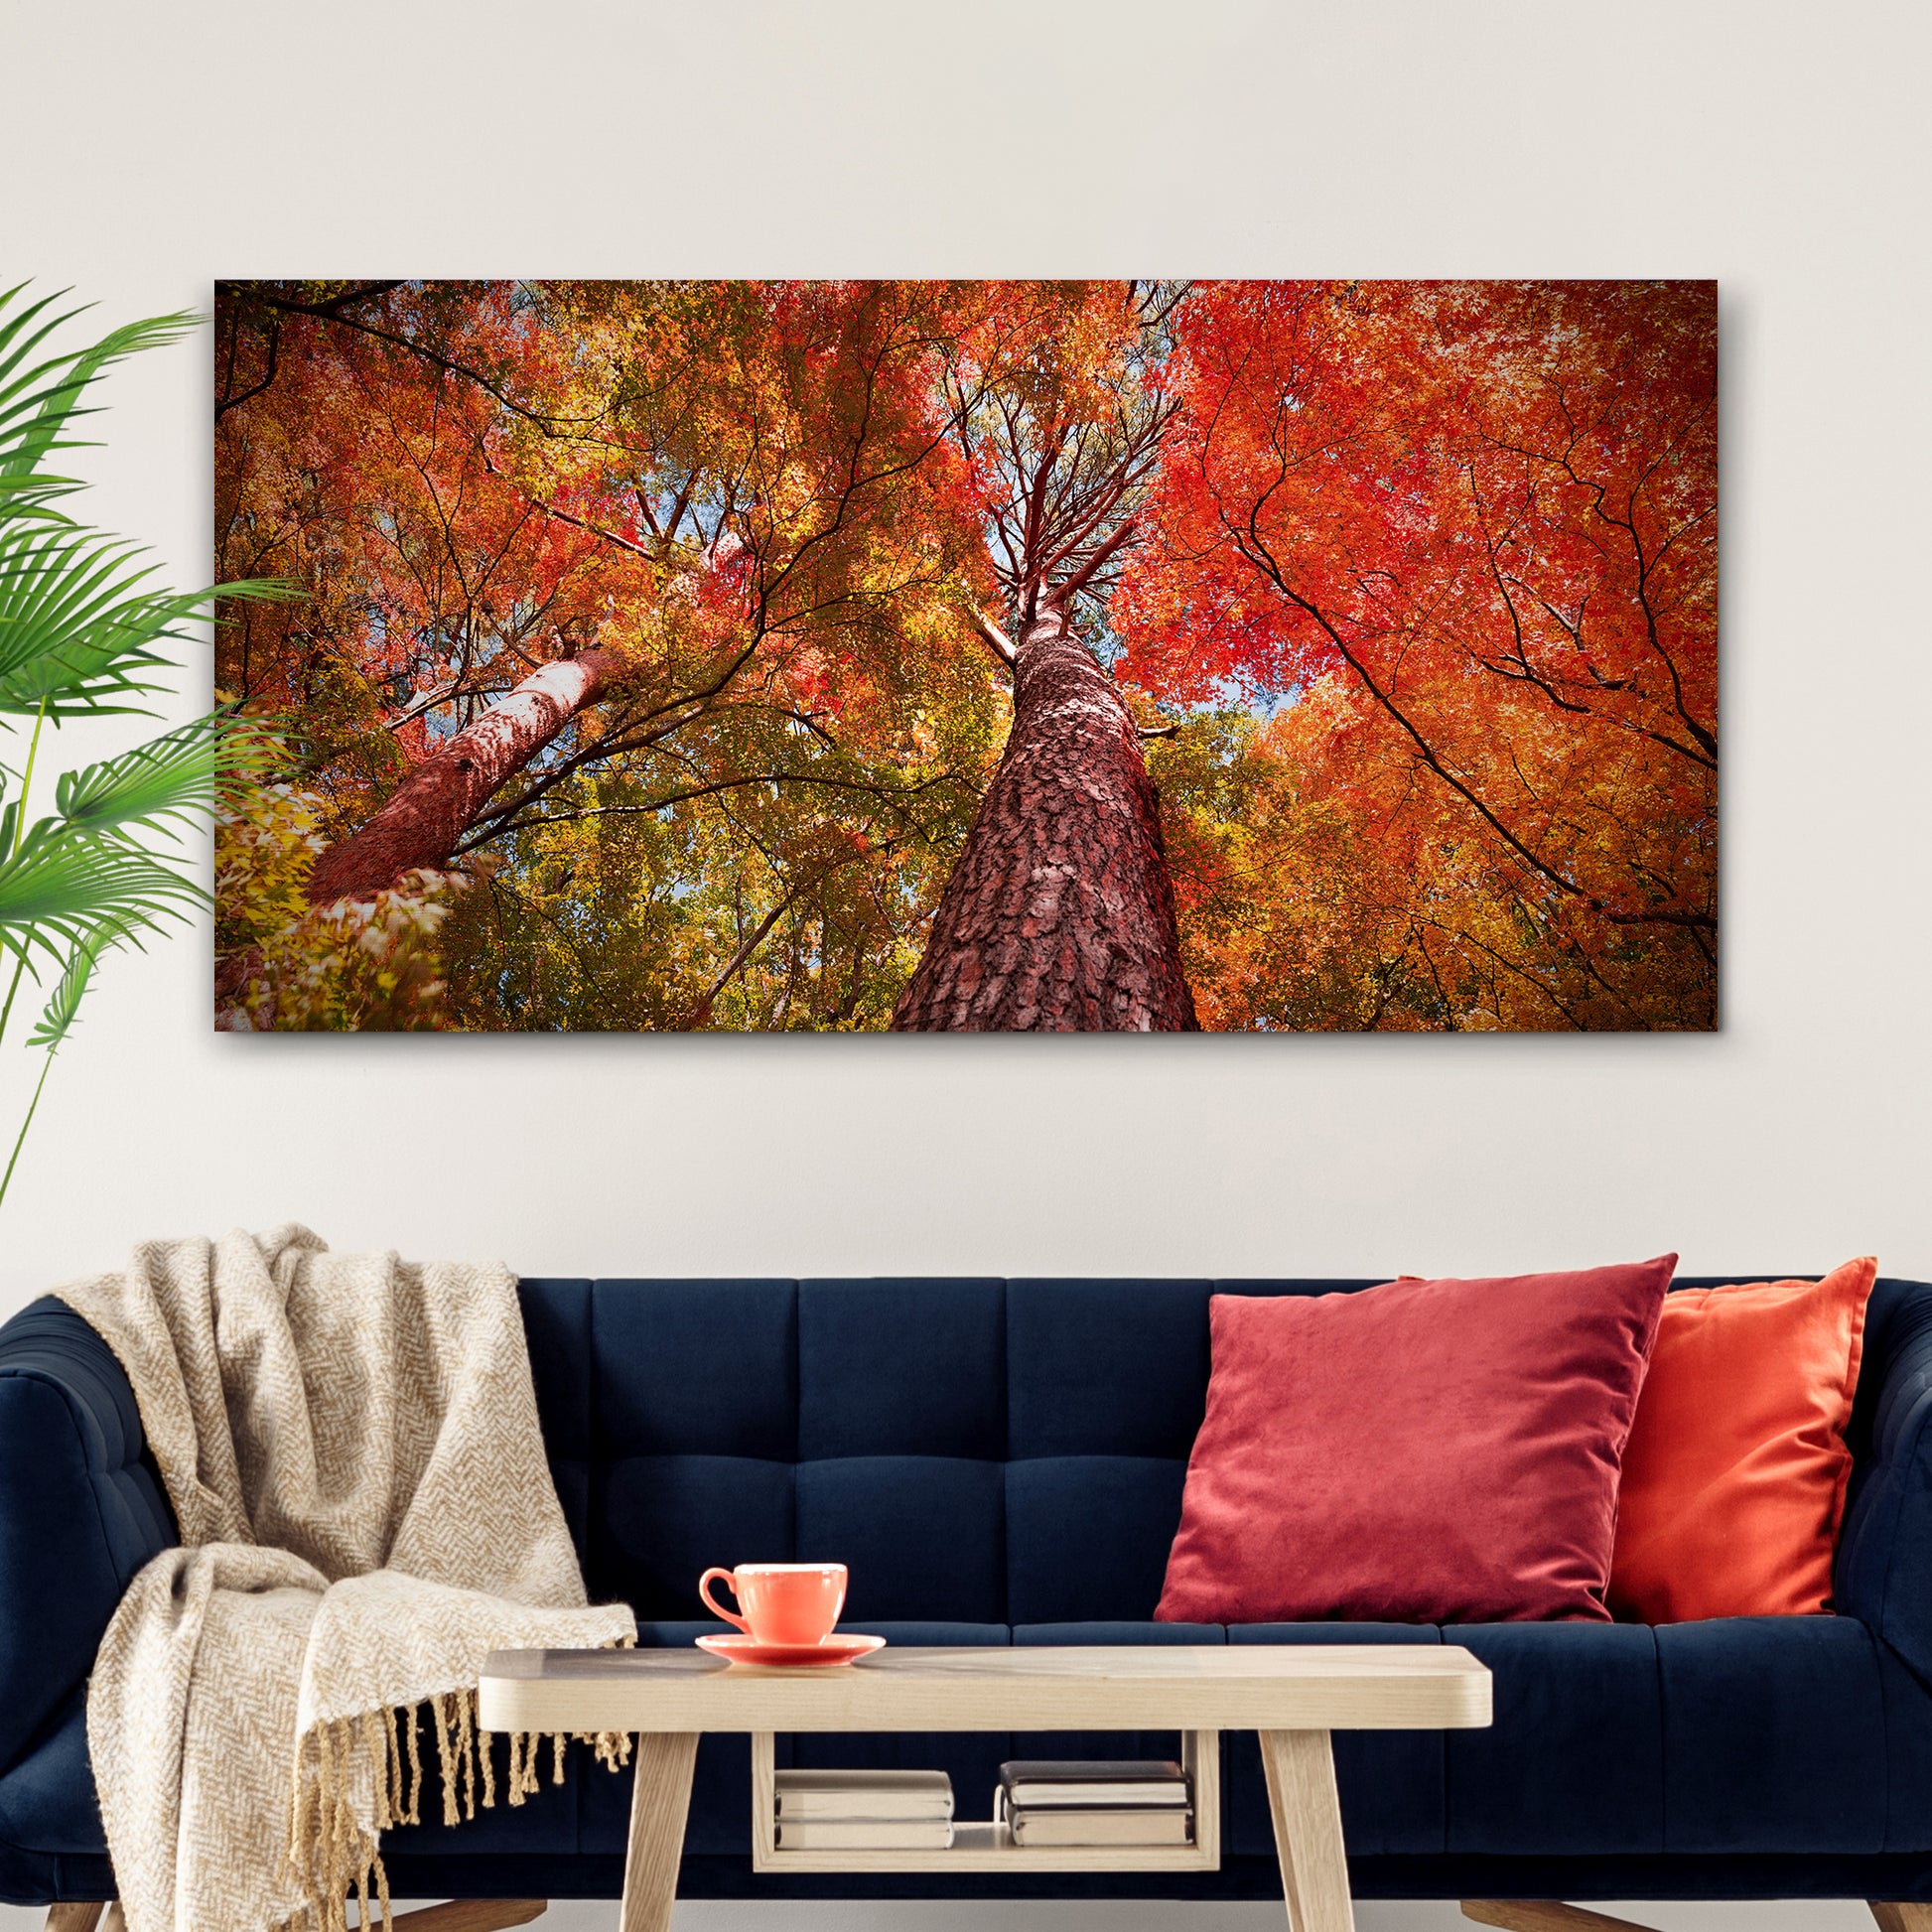 Under The Maple Trees On A Beautiful Morning Canvas Wall Art Style 2 - Image by Tailored Canvases